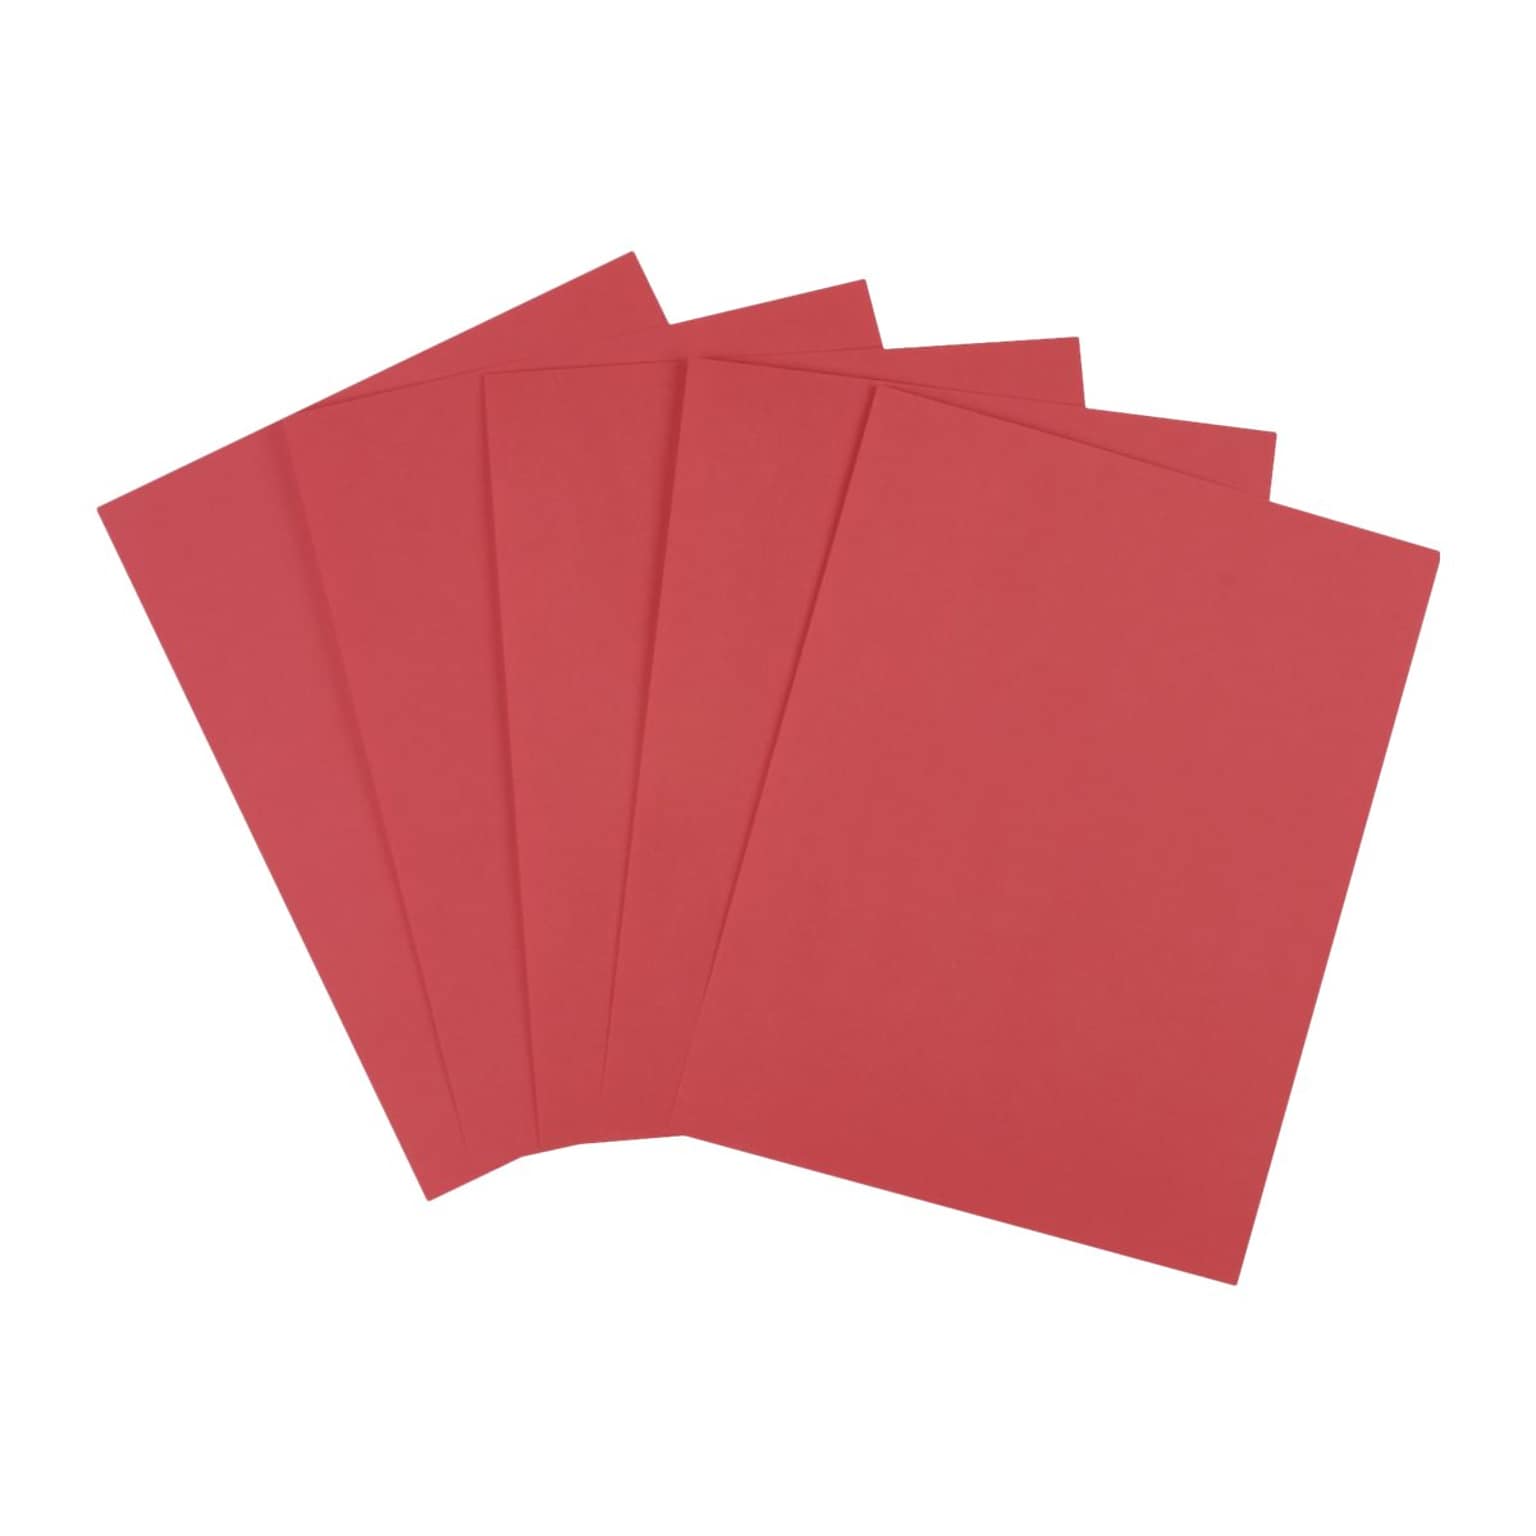 Staples Brights Multipurpose Colored Paper, 20 lbs., 8.5 x 11, Red, 500/Ream (25208)